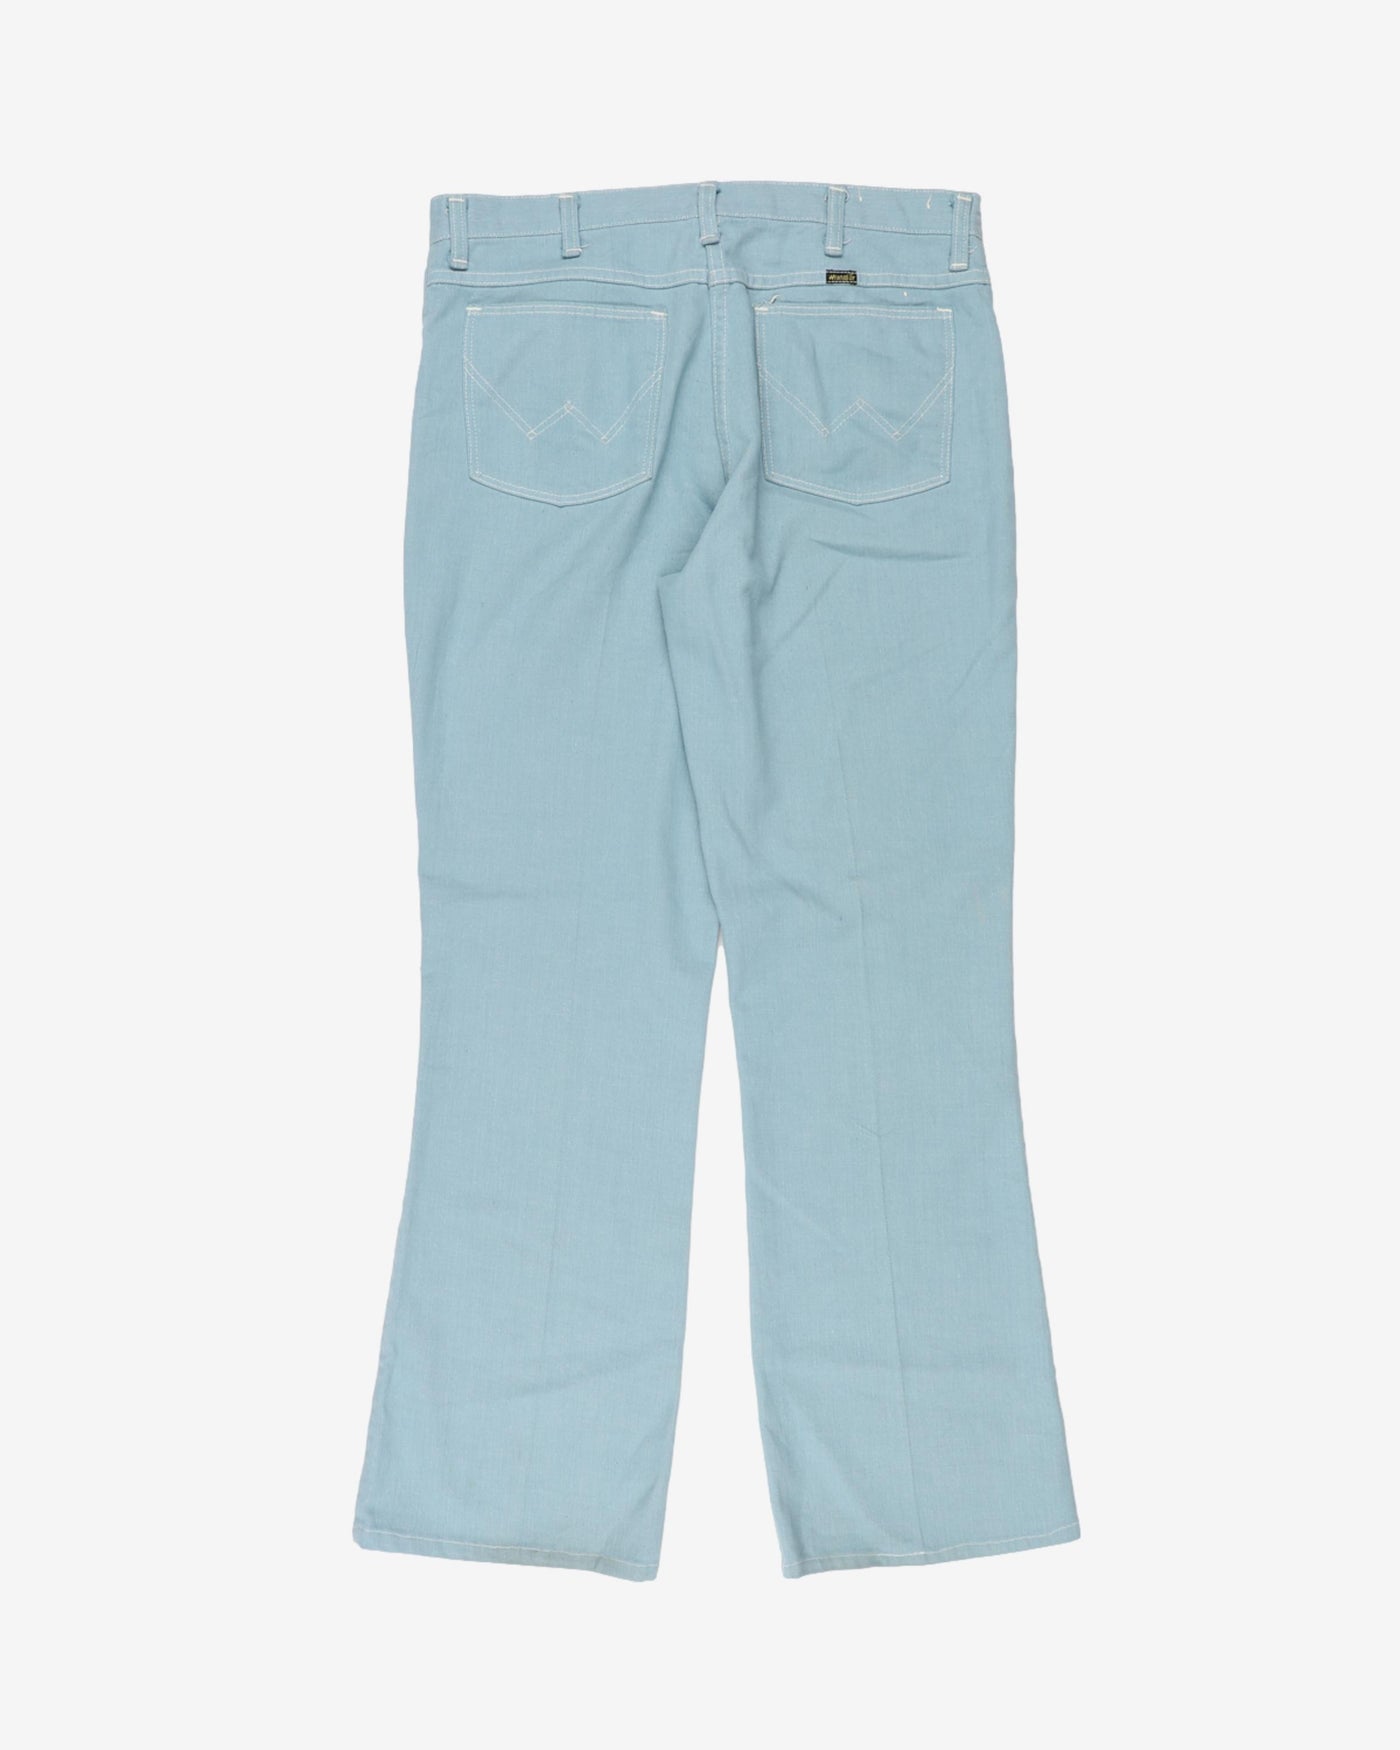 Vintage 70s Wrangler Baby Blue Trousers - W35 L30